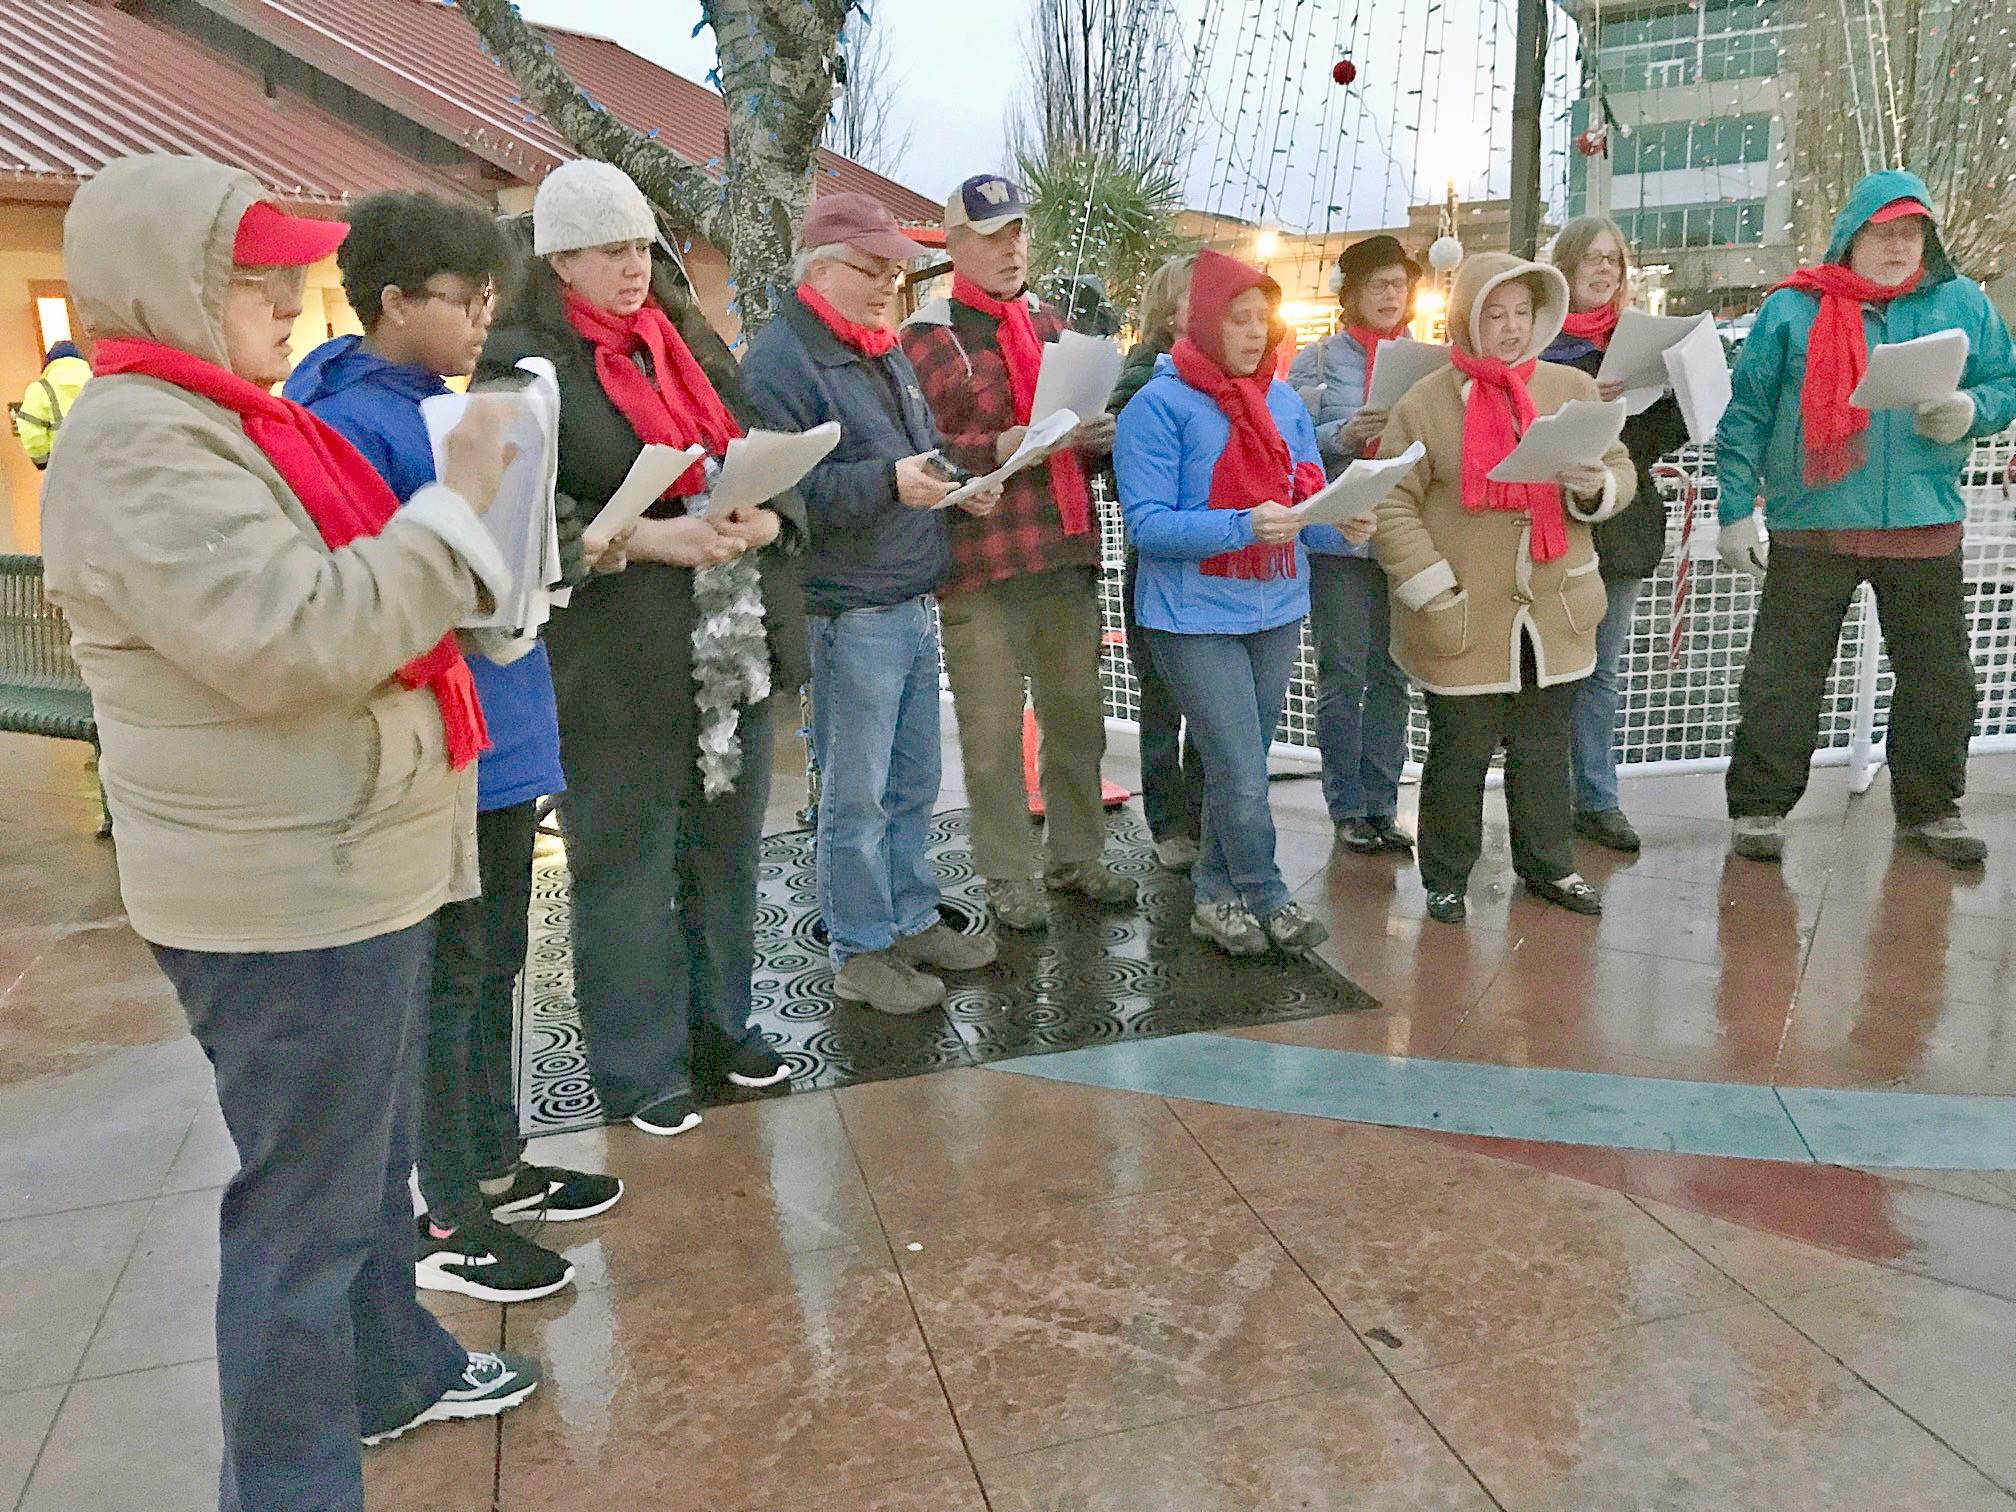 Kent Lutheran Church members sing Christmas carols in the Kent Town Square Plaza during Winterfest last year. The group returns to entertain festival goers this year. MARK KLAAS, Kent Reporter